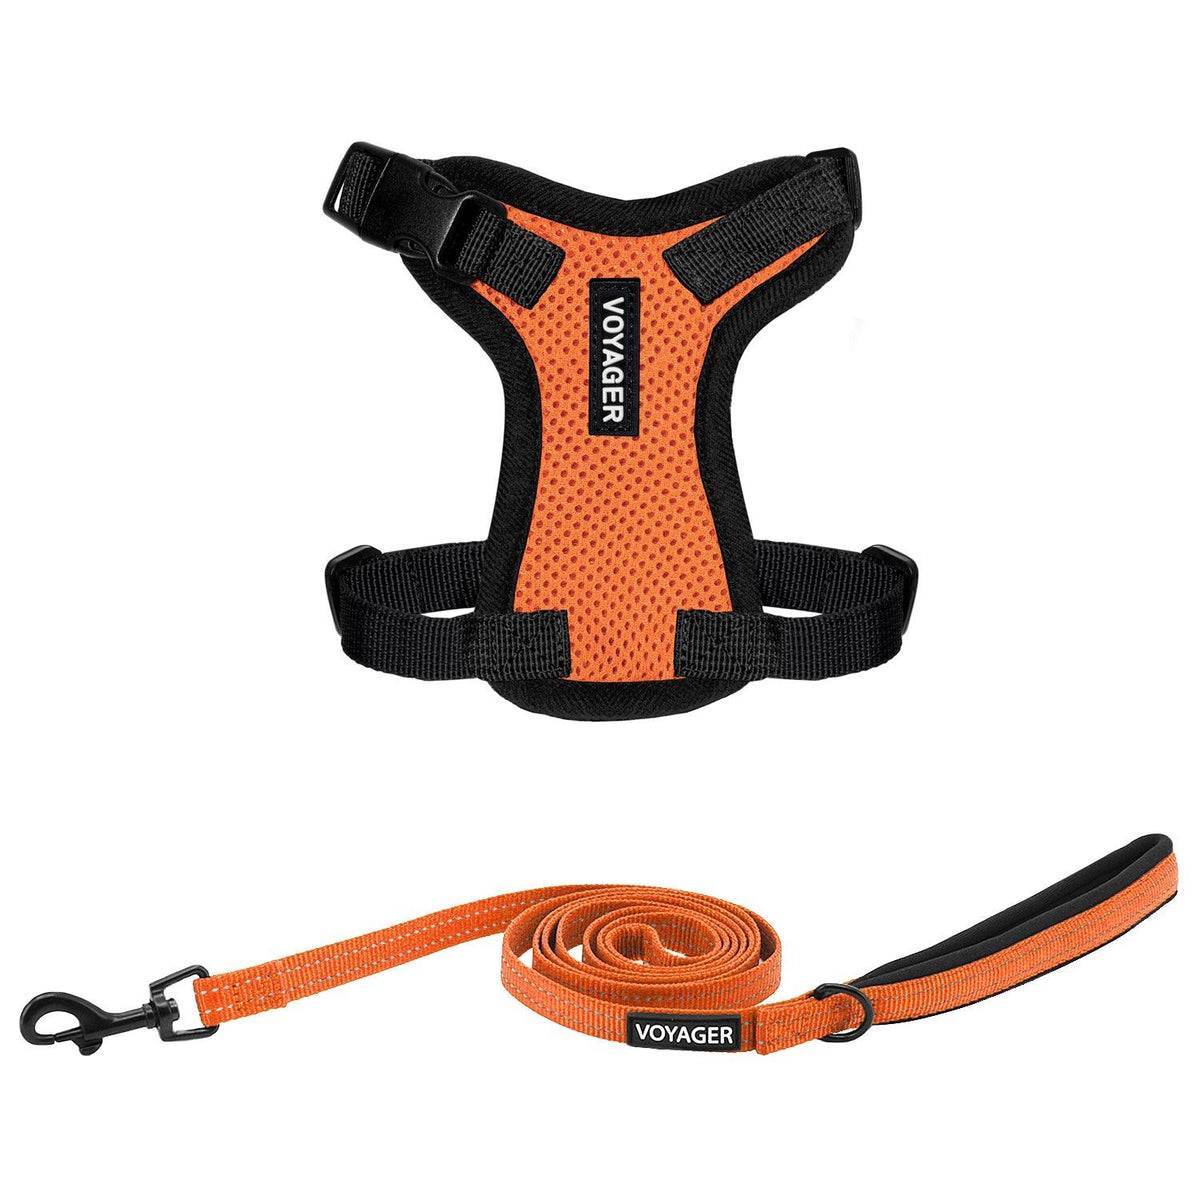 Step-In Lock Harness & Leash Set For Cats - VOYAGER Dog Harnesses